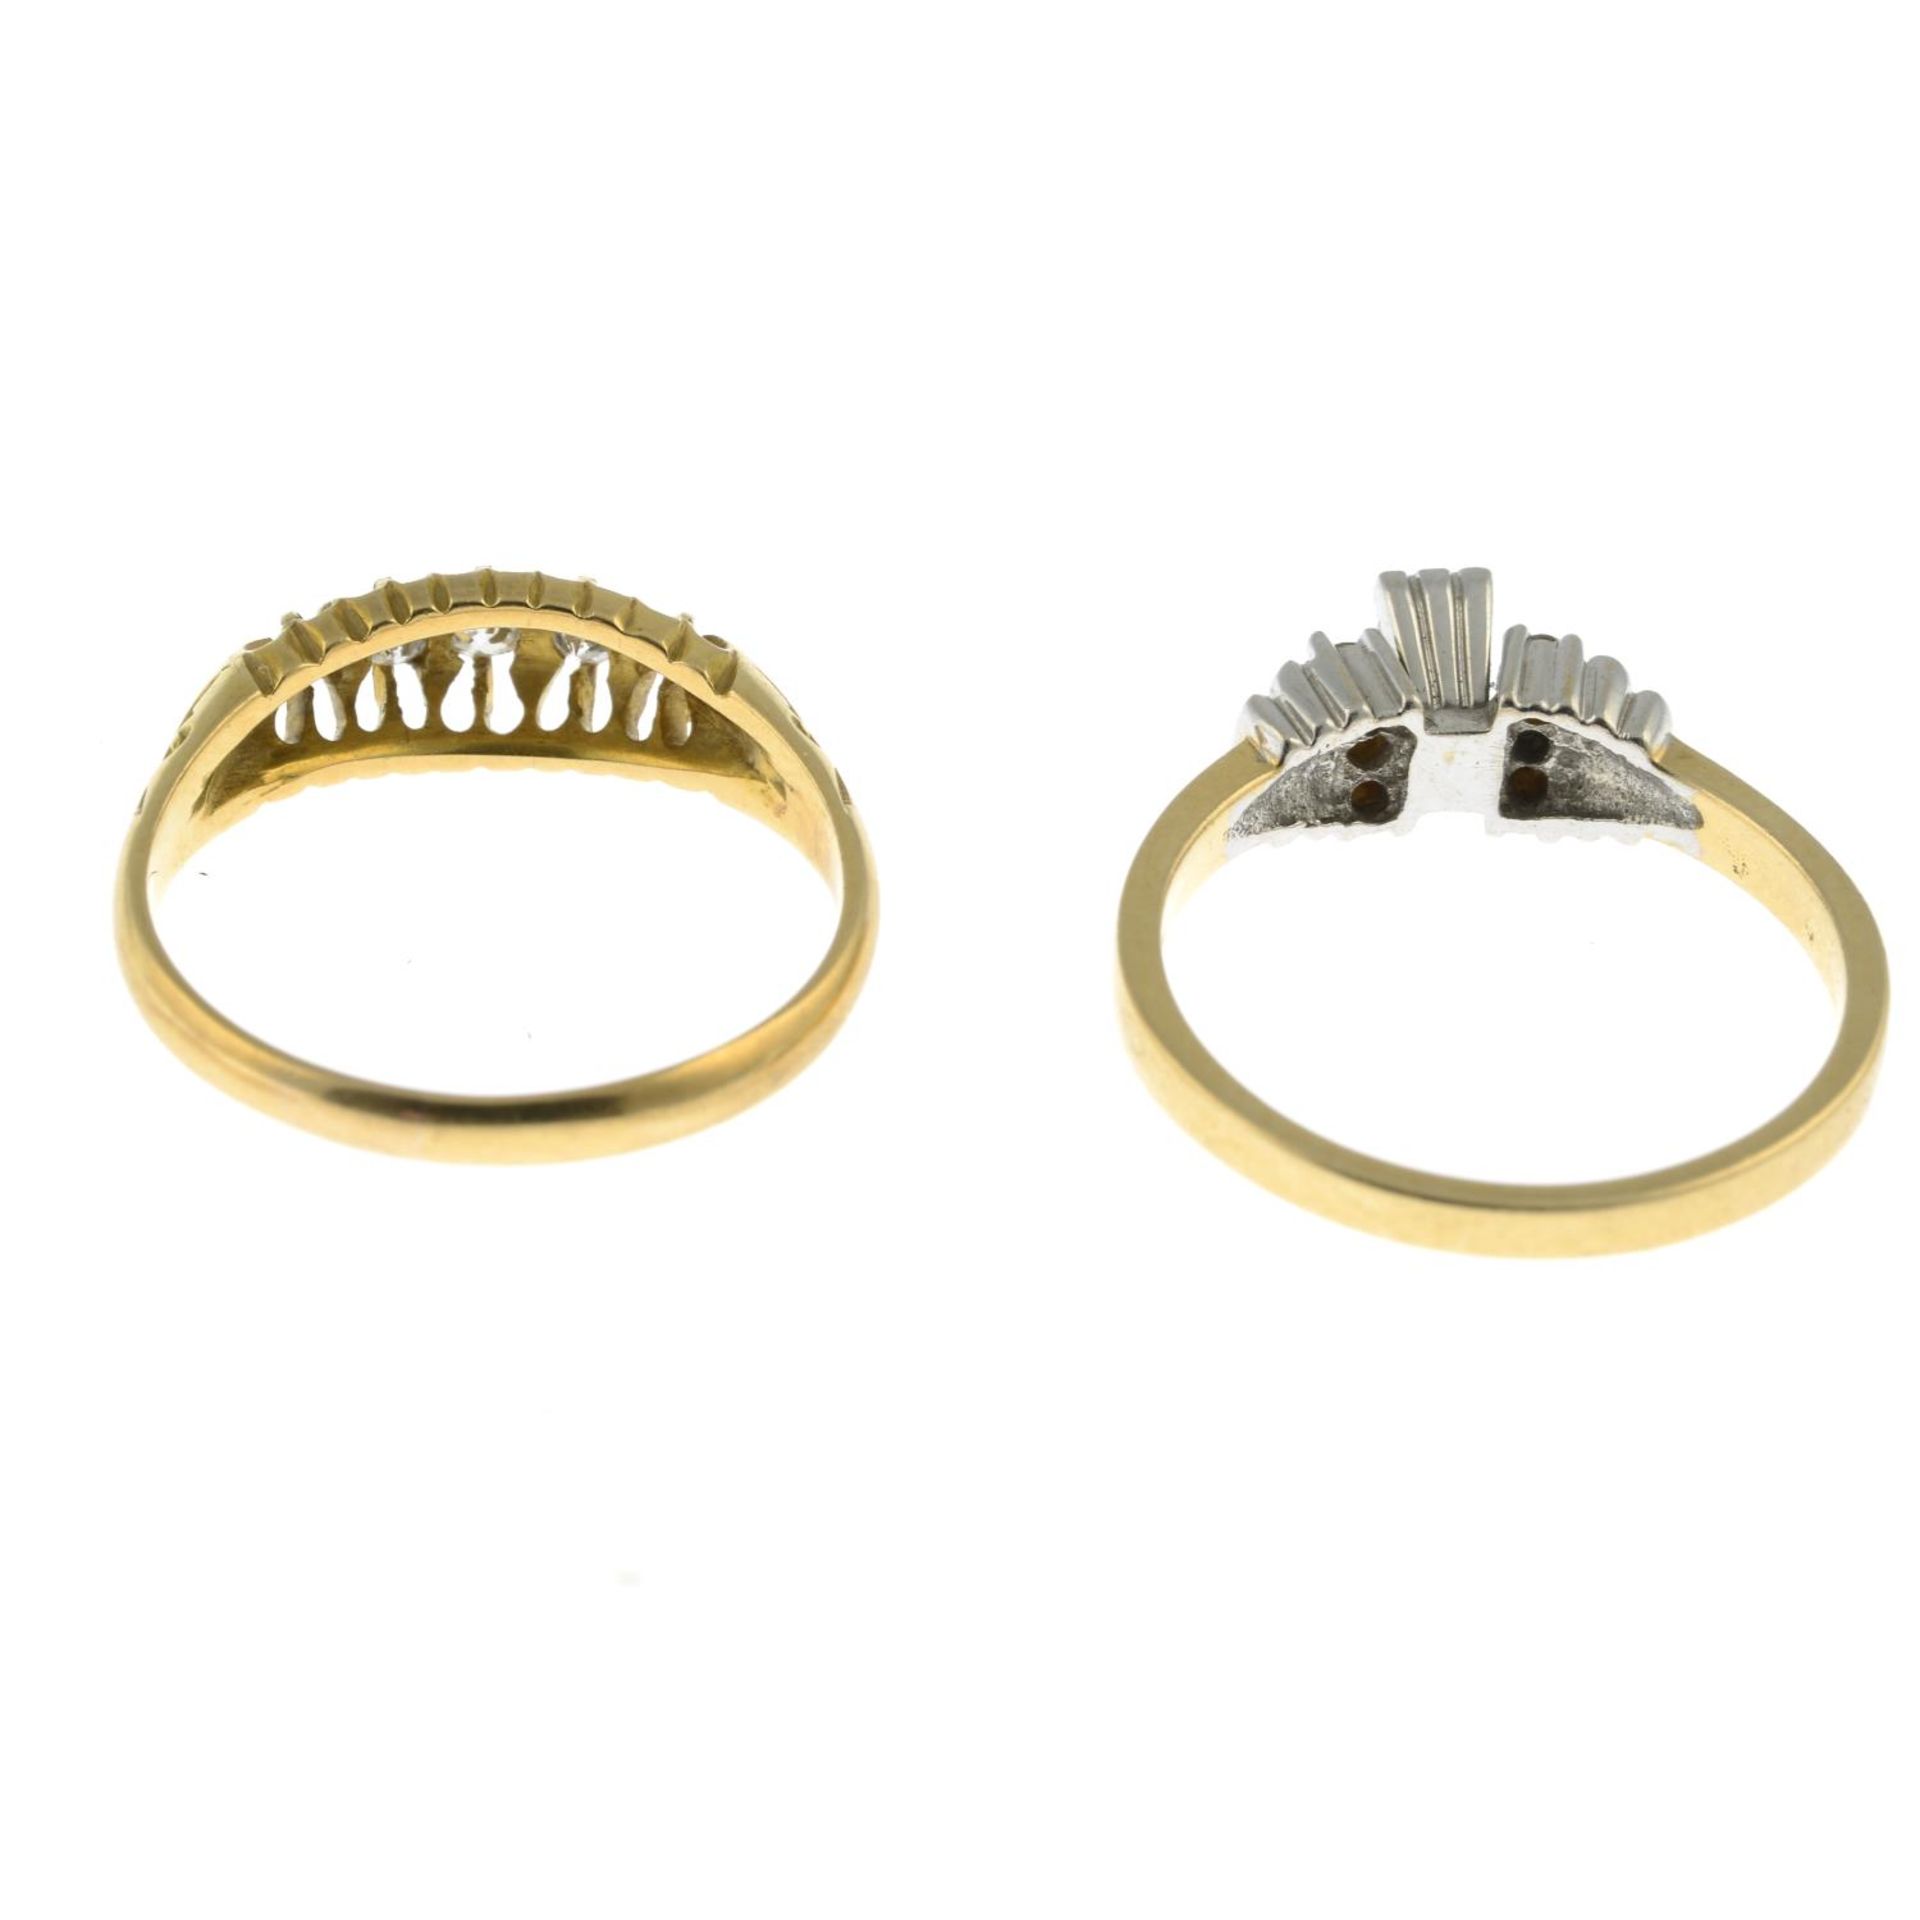 Early 20th century 18ct gold diamond five-stone ring, - Image 2 of 2